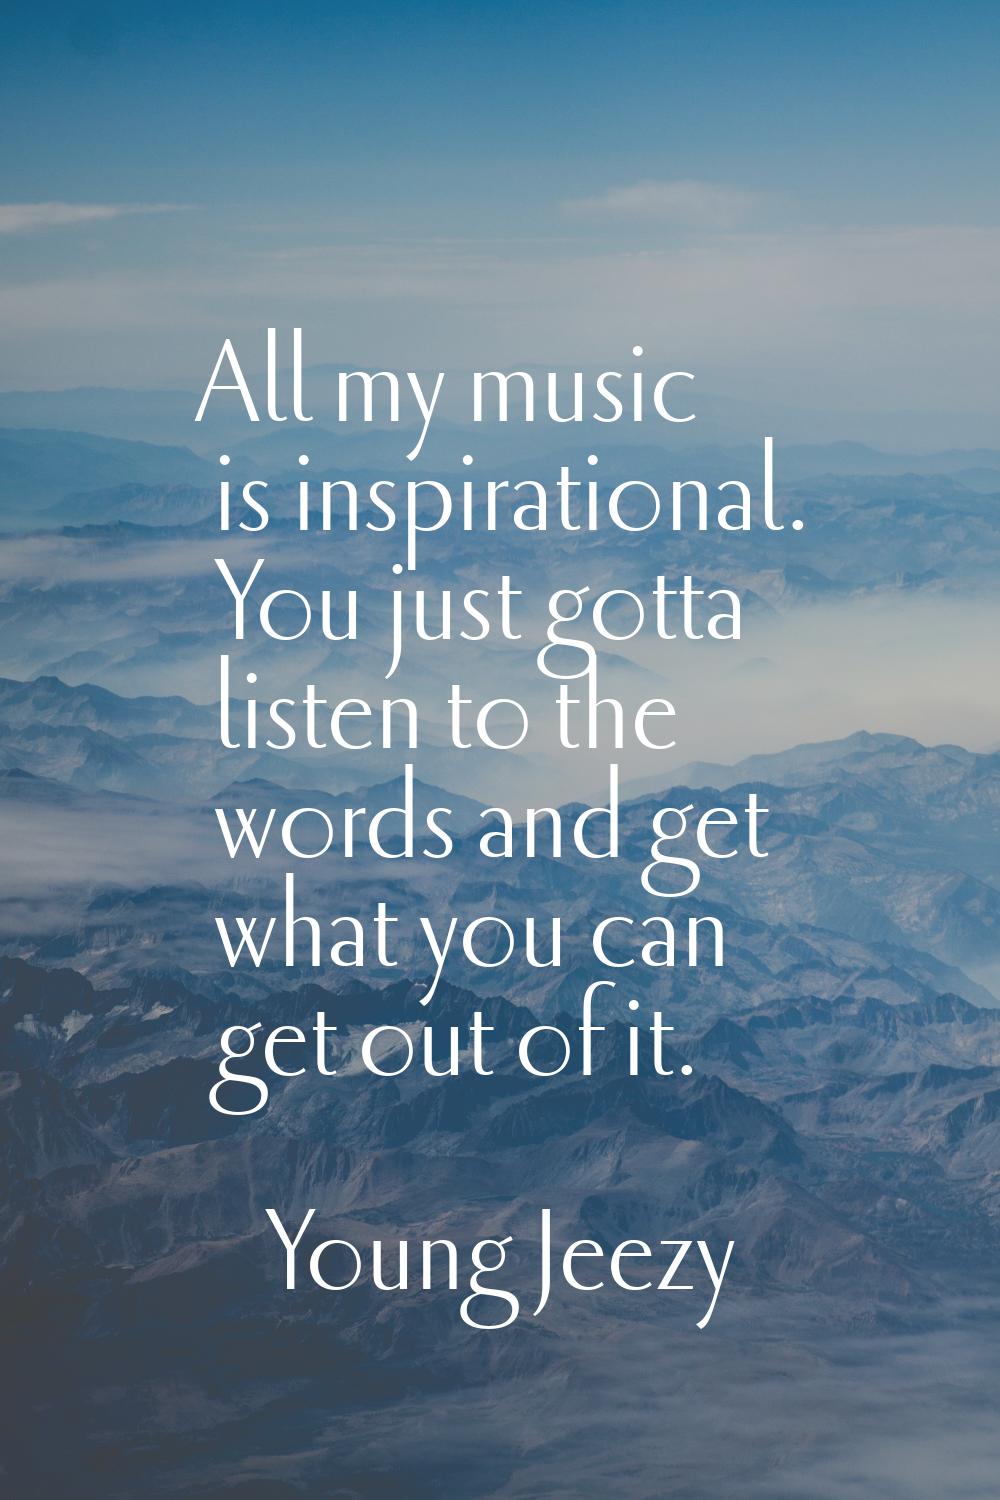 All my music is inspirational. You just gotta listen to the words and get what you can get out of i